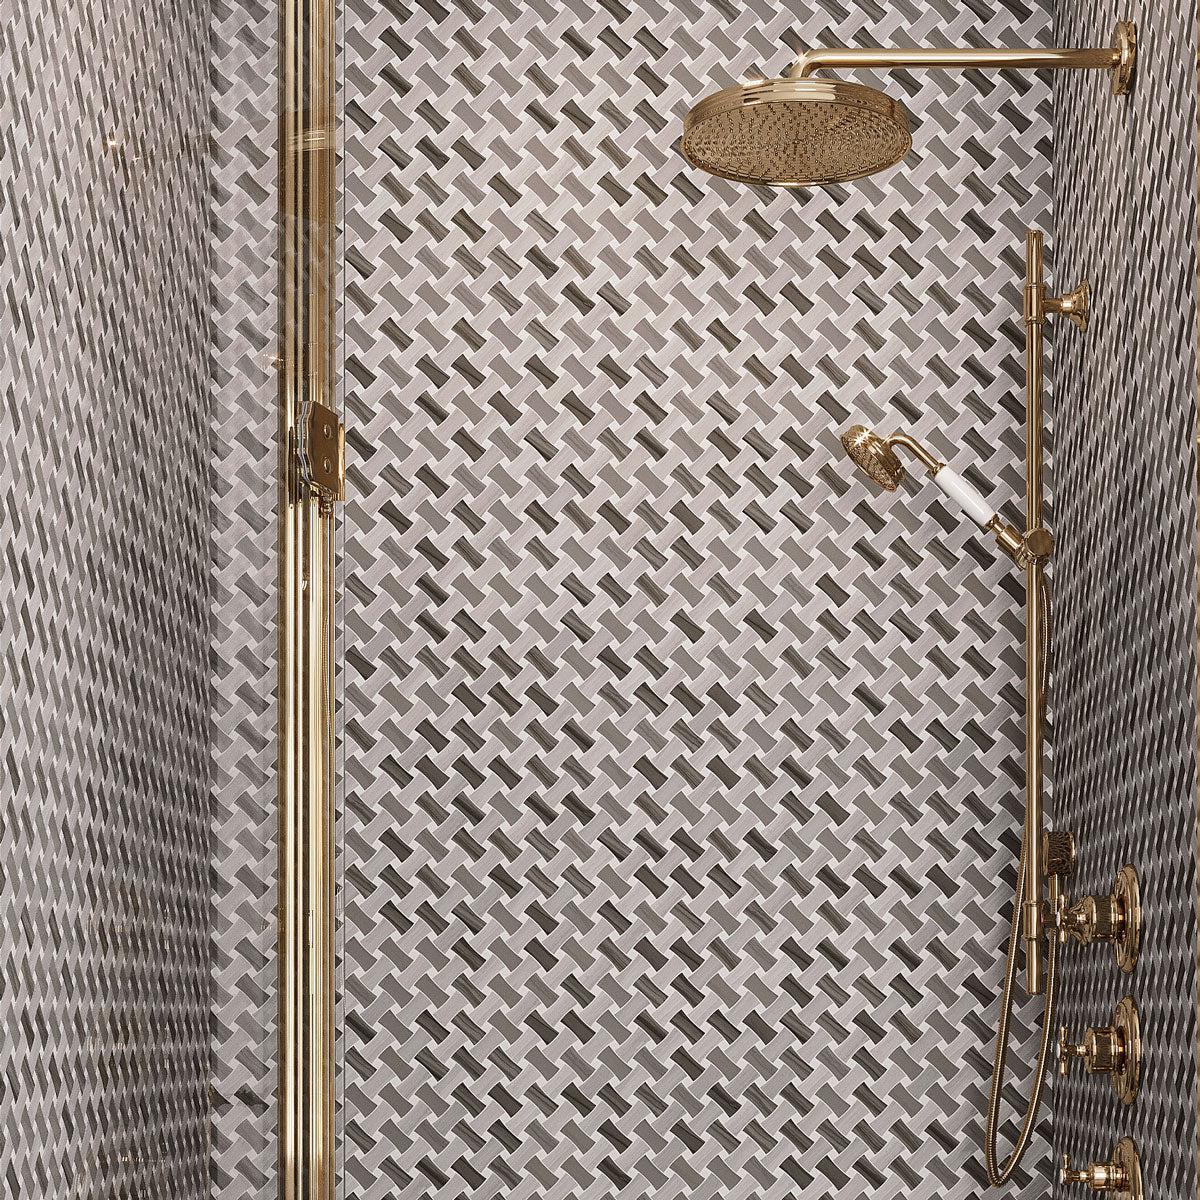 Wooden Beige Curved Basket Weave Marble Mosaic Tile shower wall with brass fixtures